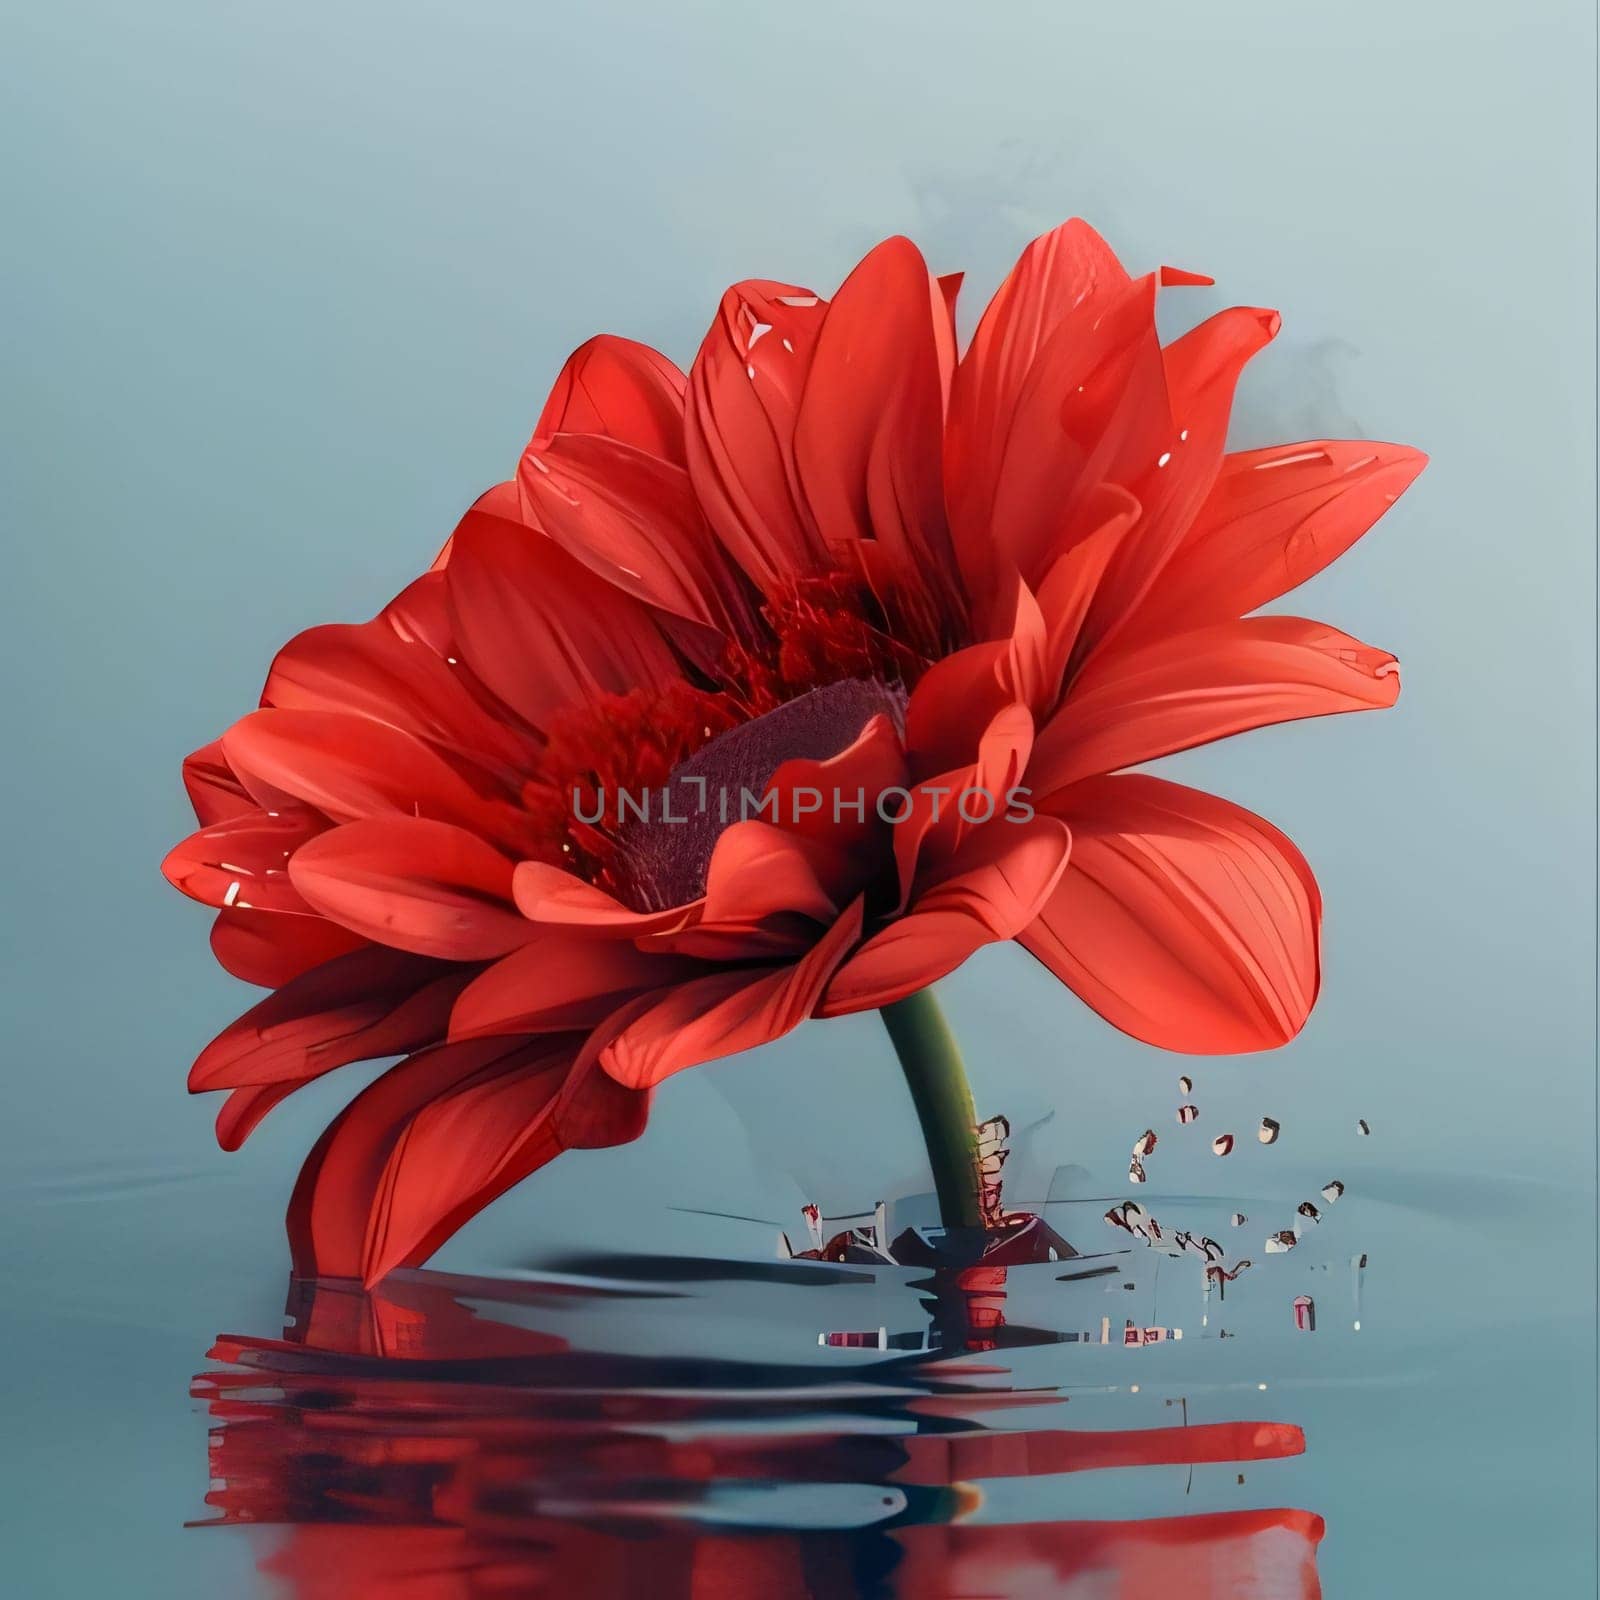 Red gerbera in water Flowering flowers, a symbol of spring, new life. A joyful time of nature awakening to life.